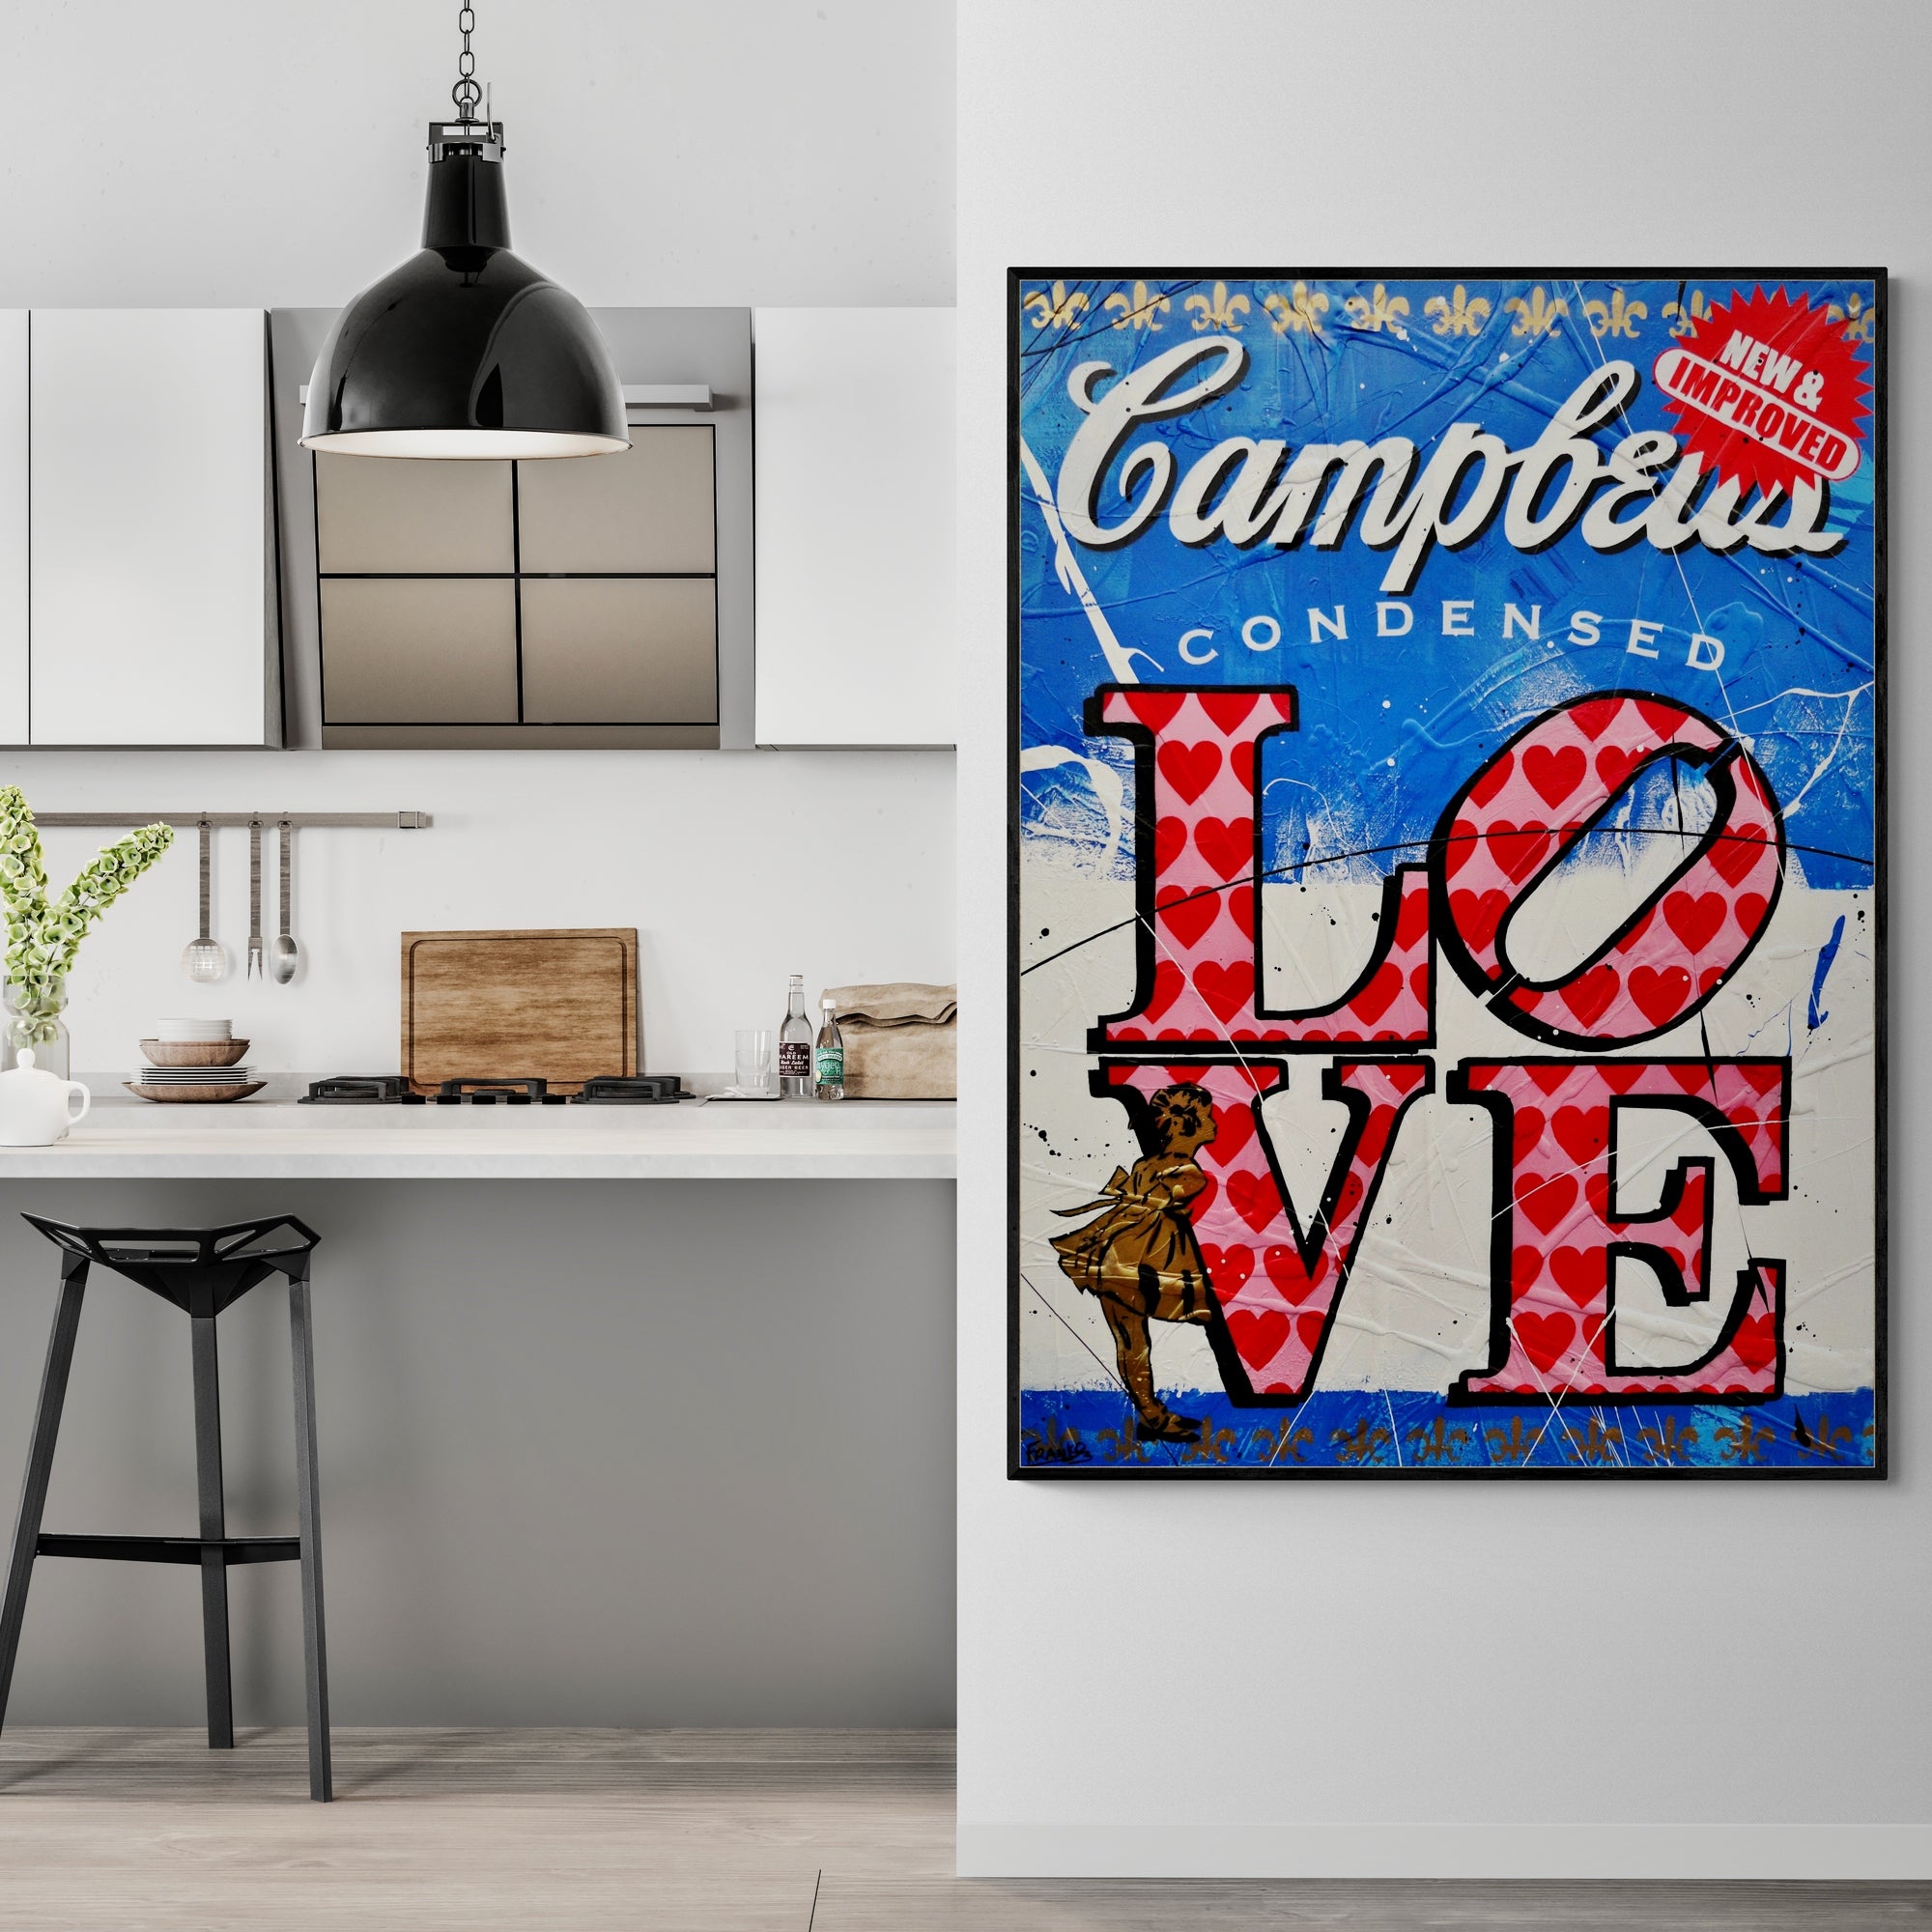 Condensed New Love 140cm x 100cm Campbell's Soup Textured Urban Pop Art Painting (SOLD)